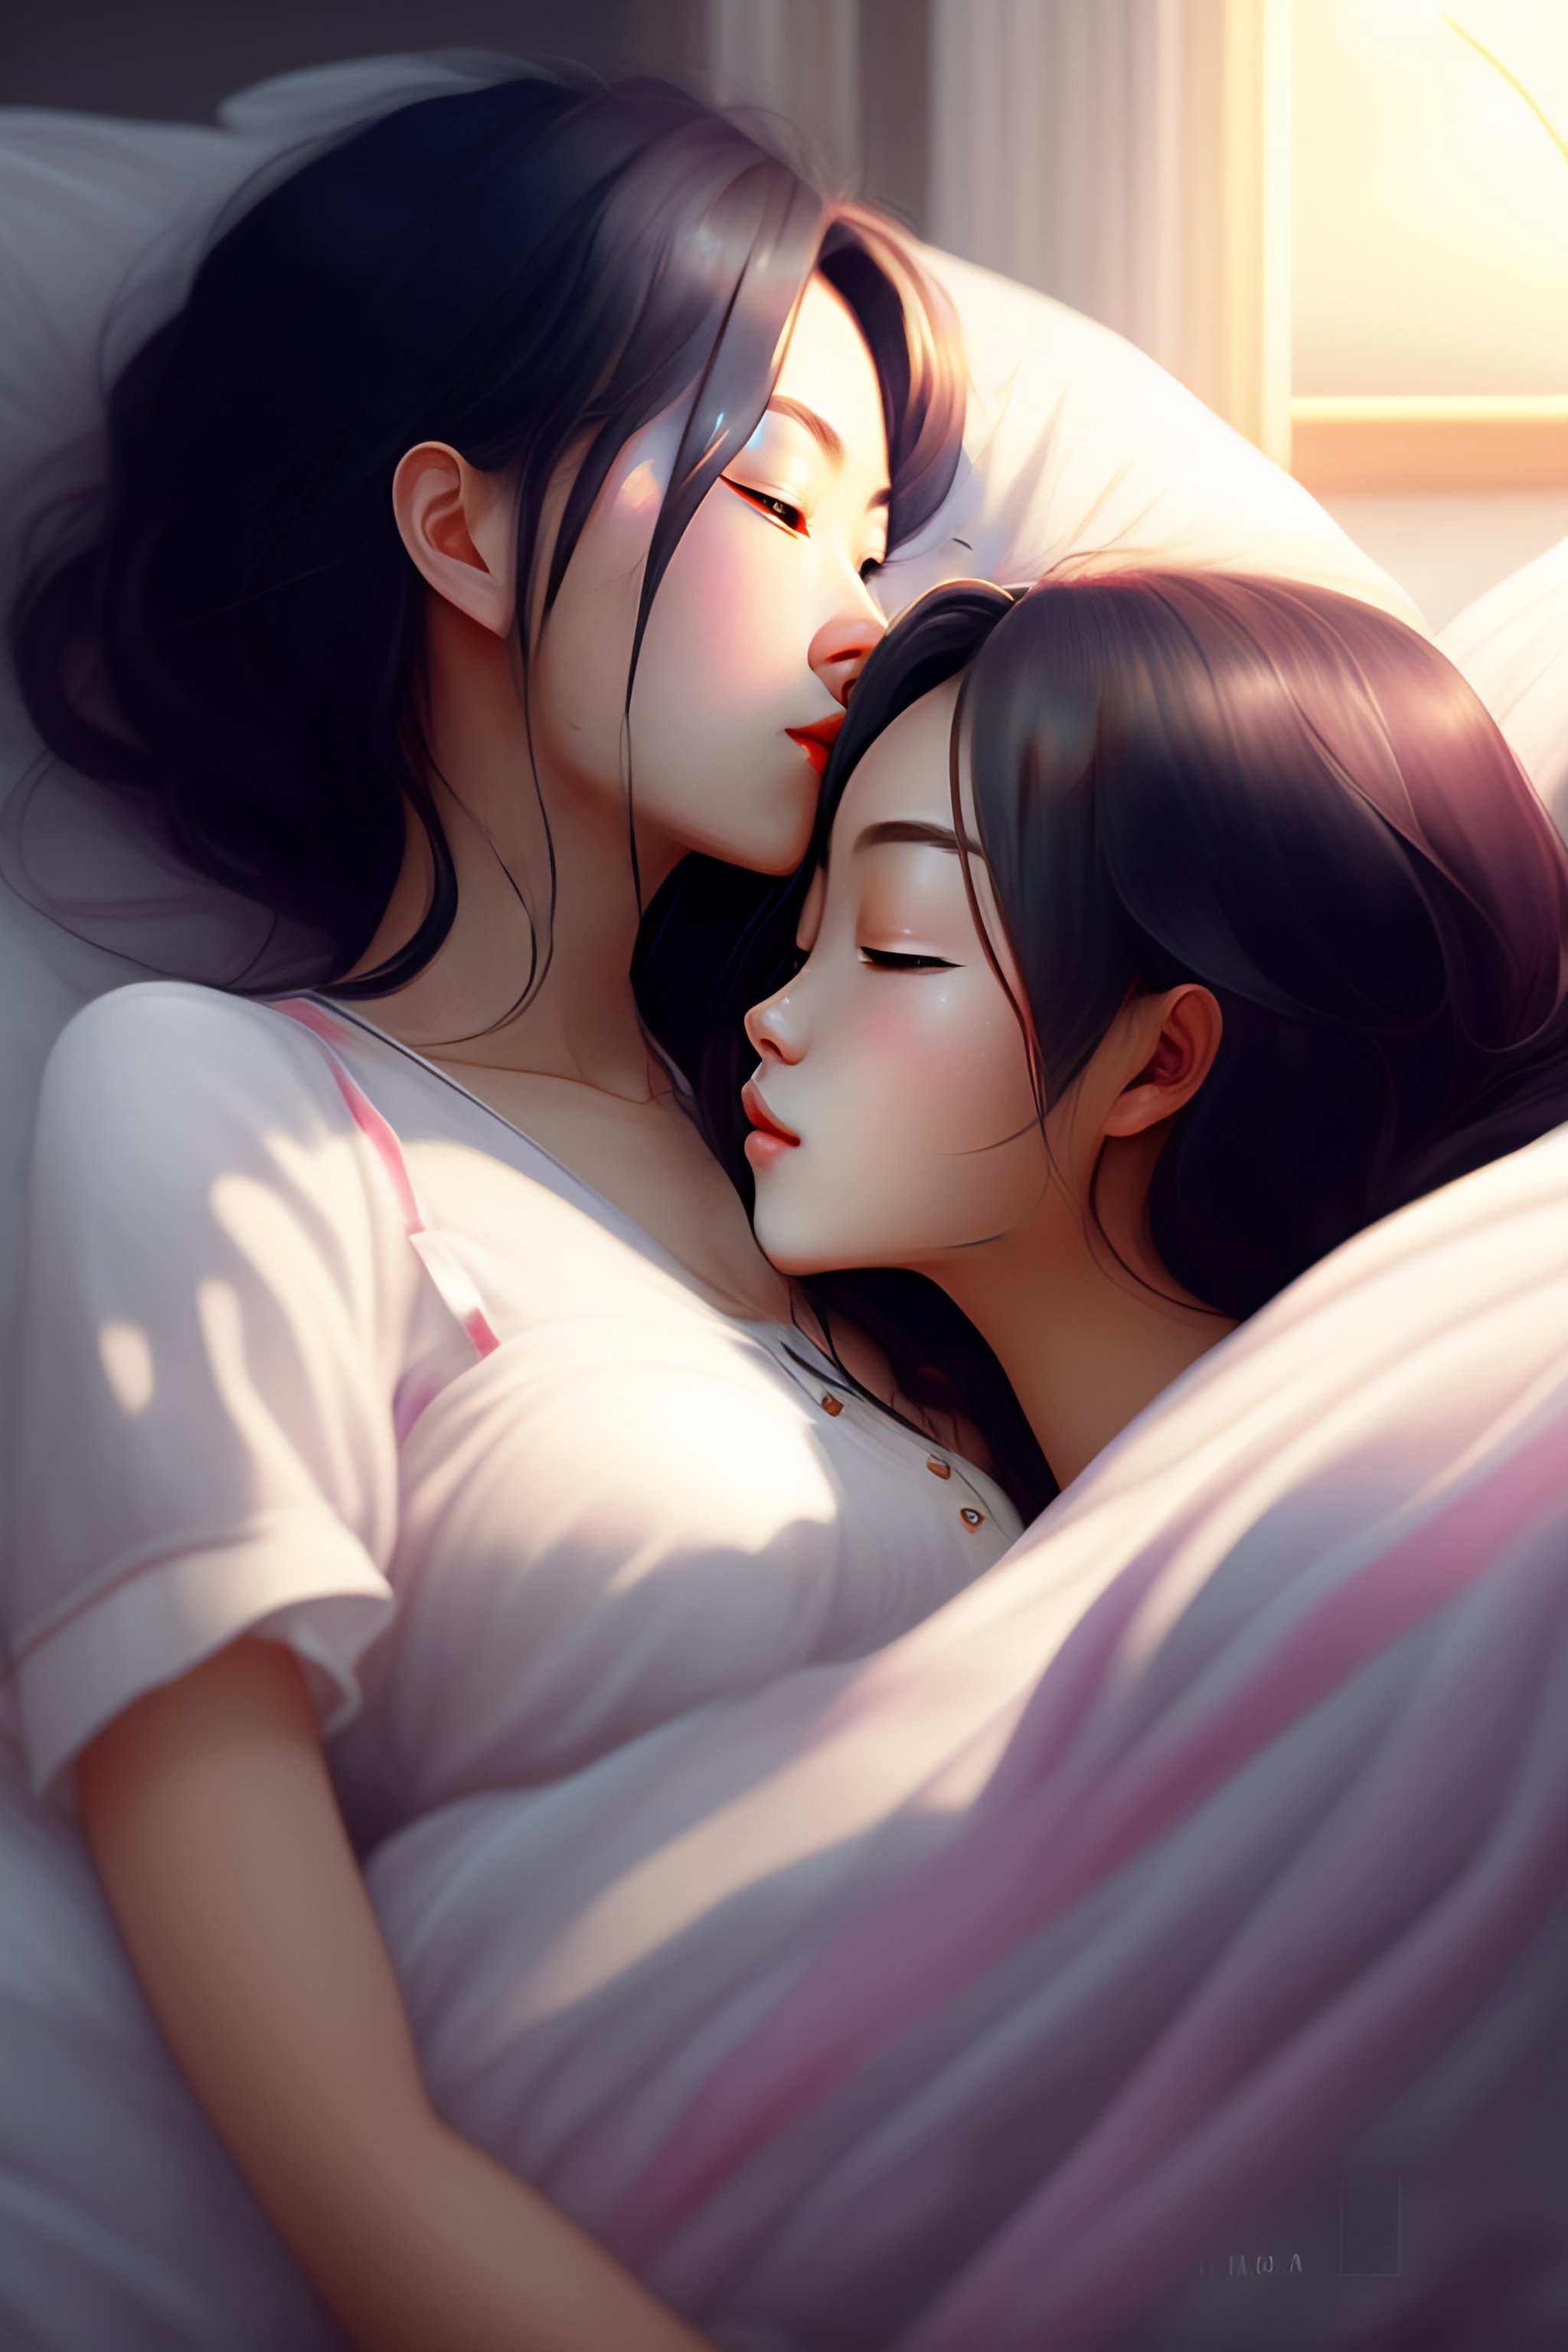 2 anime girl kissing on a bed 